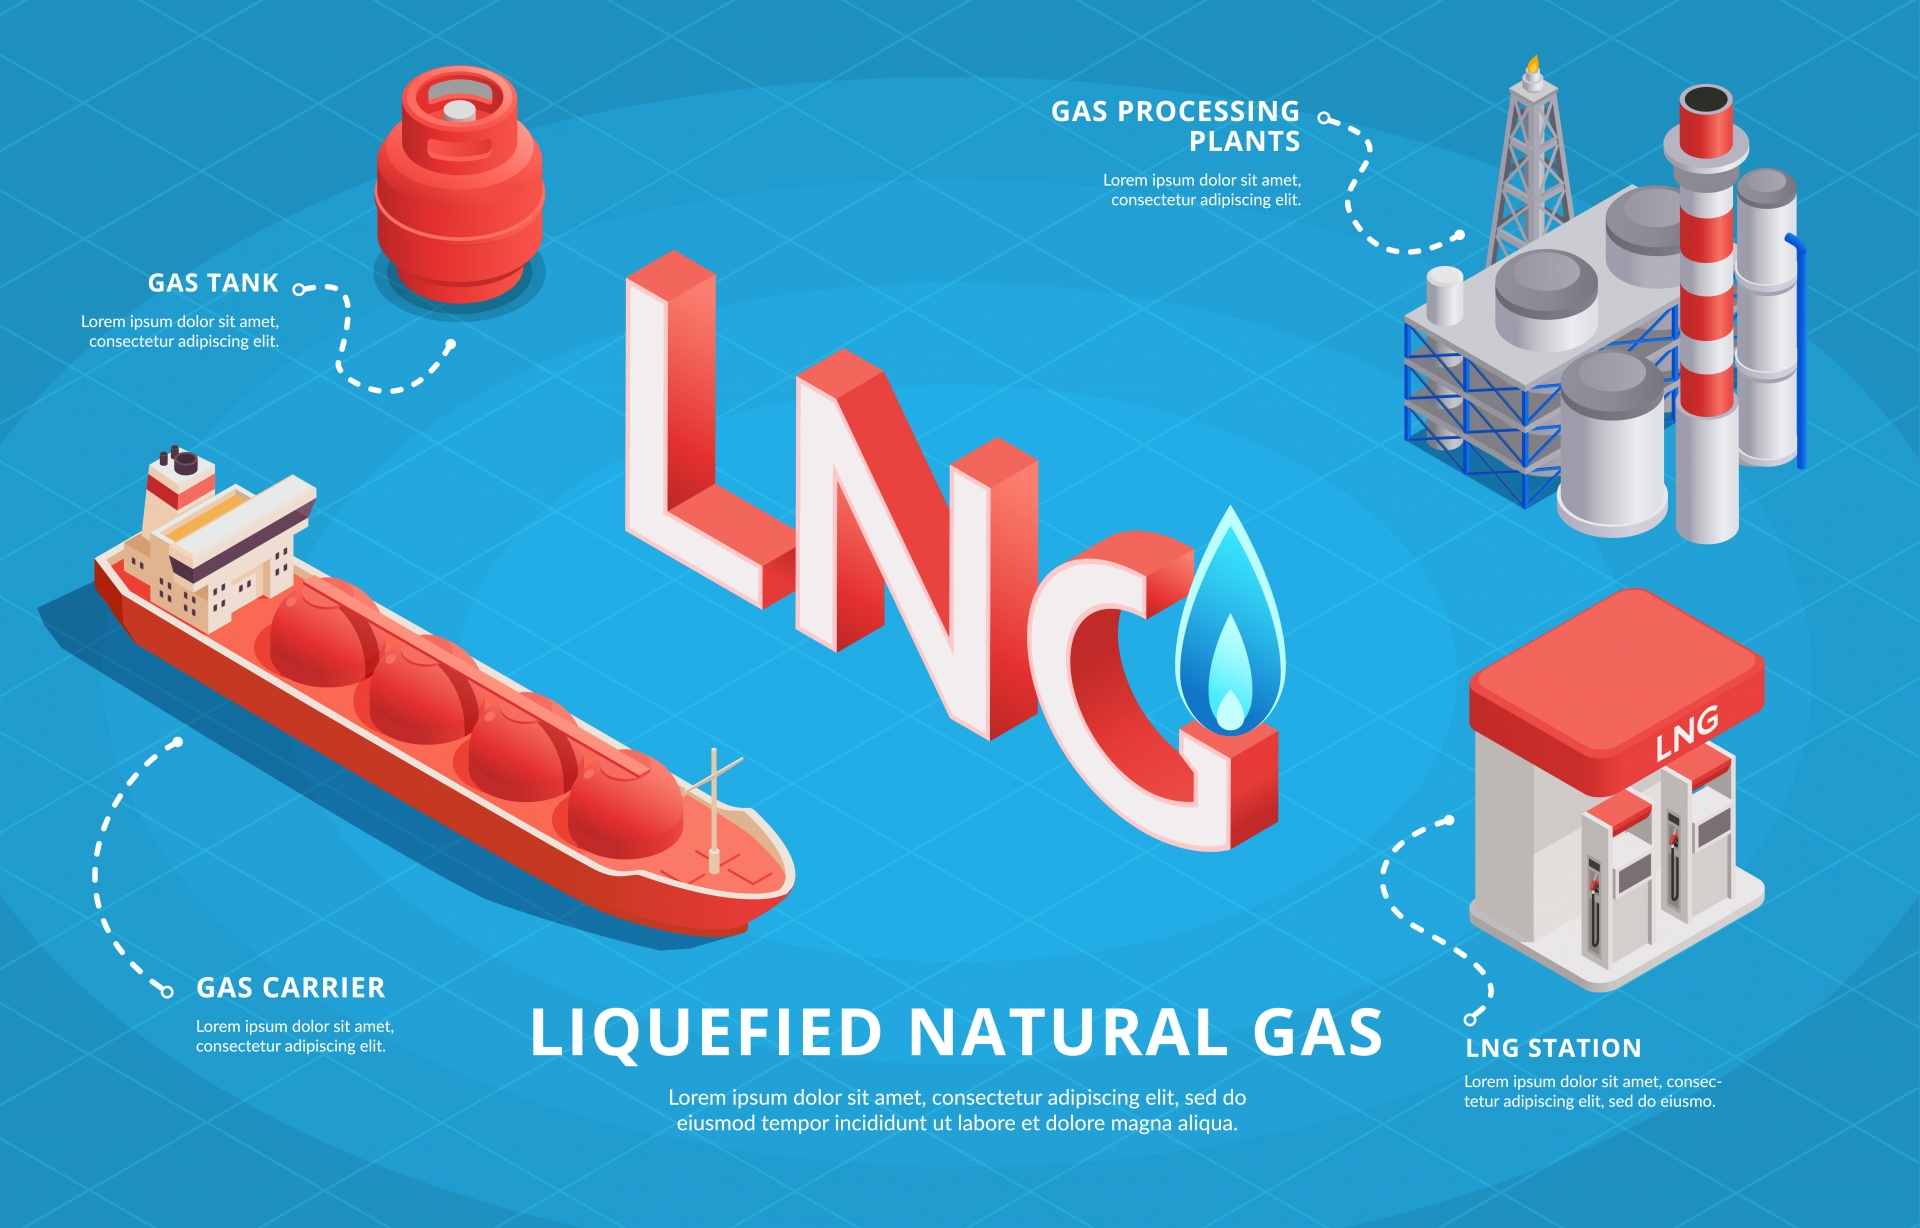 Vietnam's LNG power projects face contractual hurdles and rising import costs